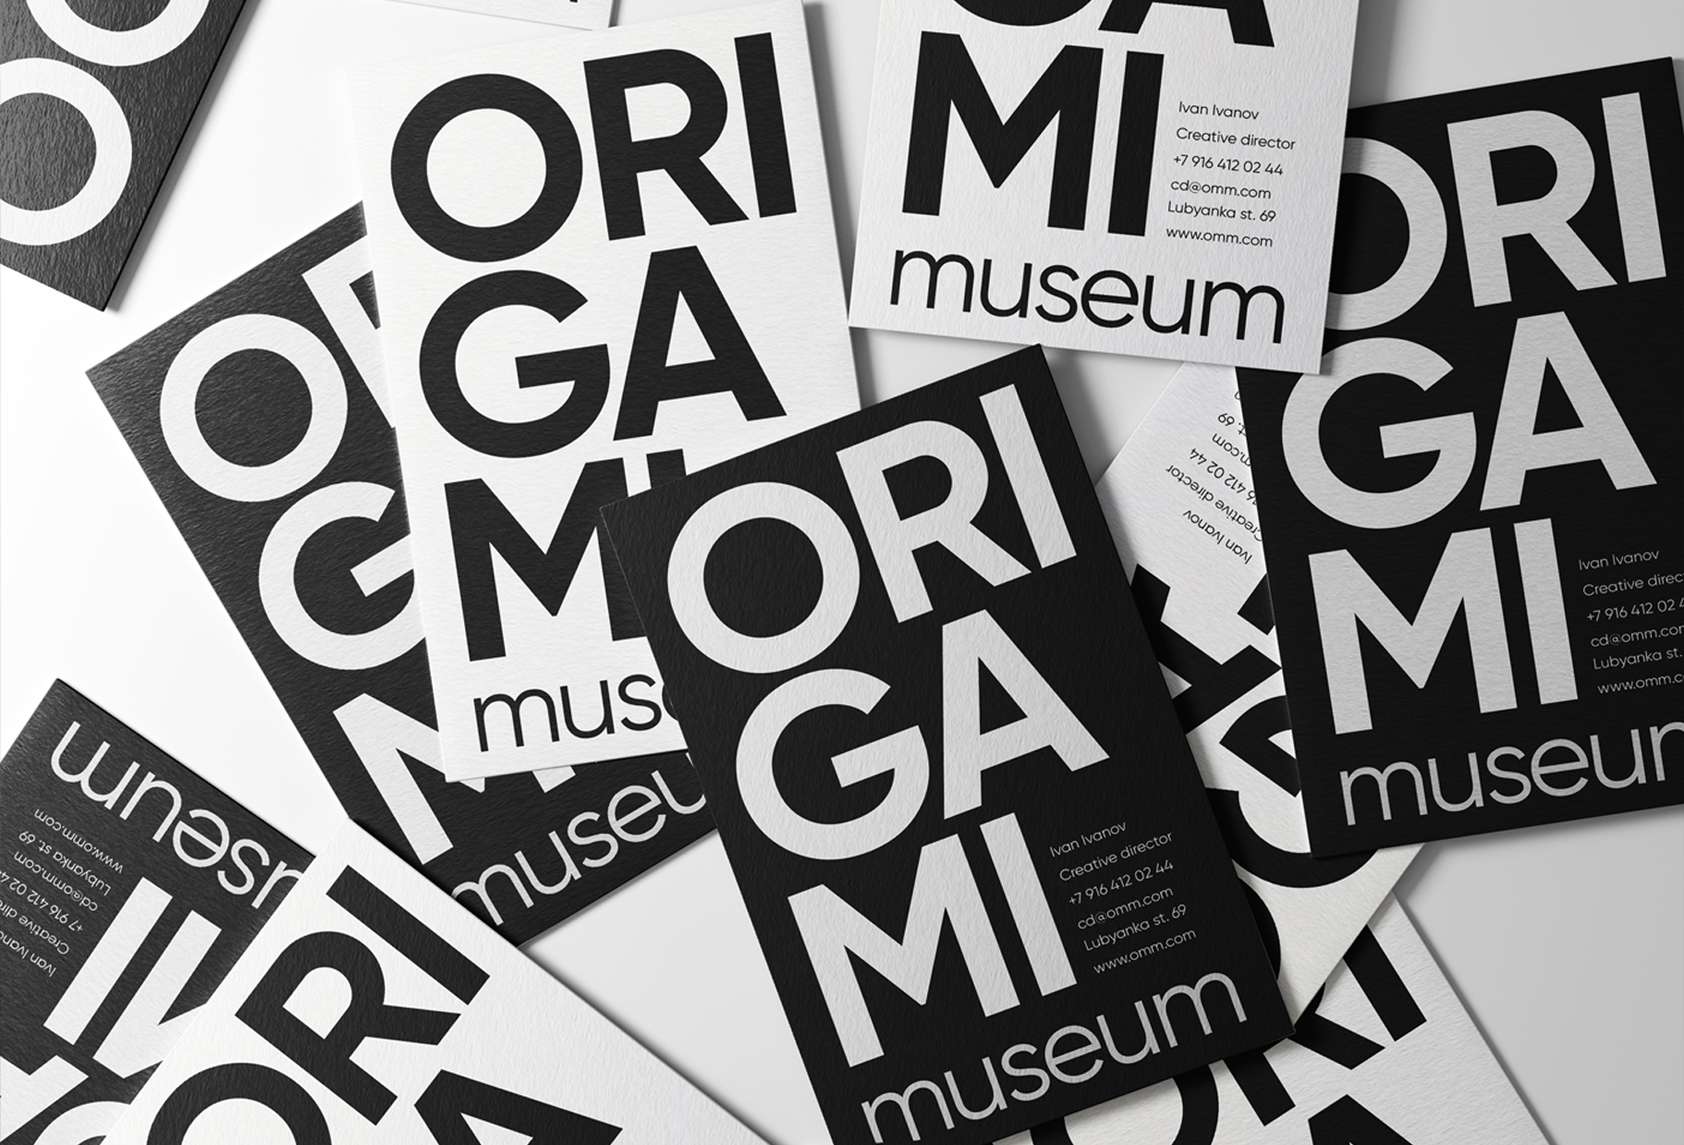 Student Yaroslav Gvozdev’s Brand Identity Concept for the Origami Museum with a View to Enhancing Visitor Experience